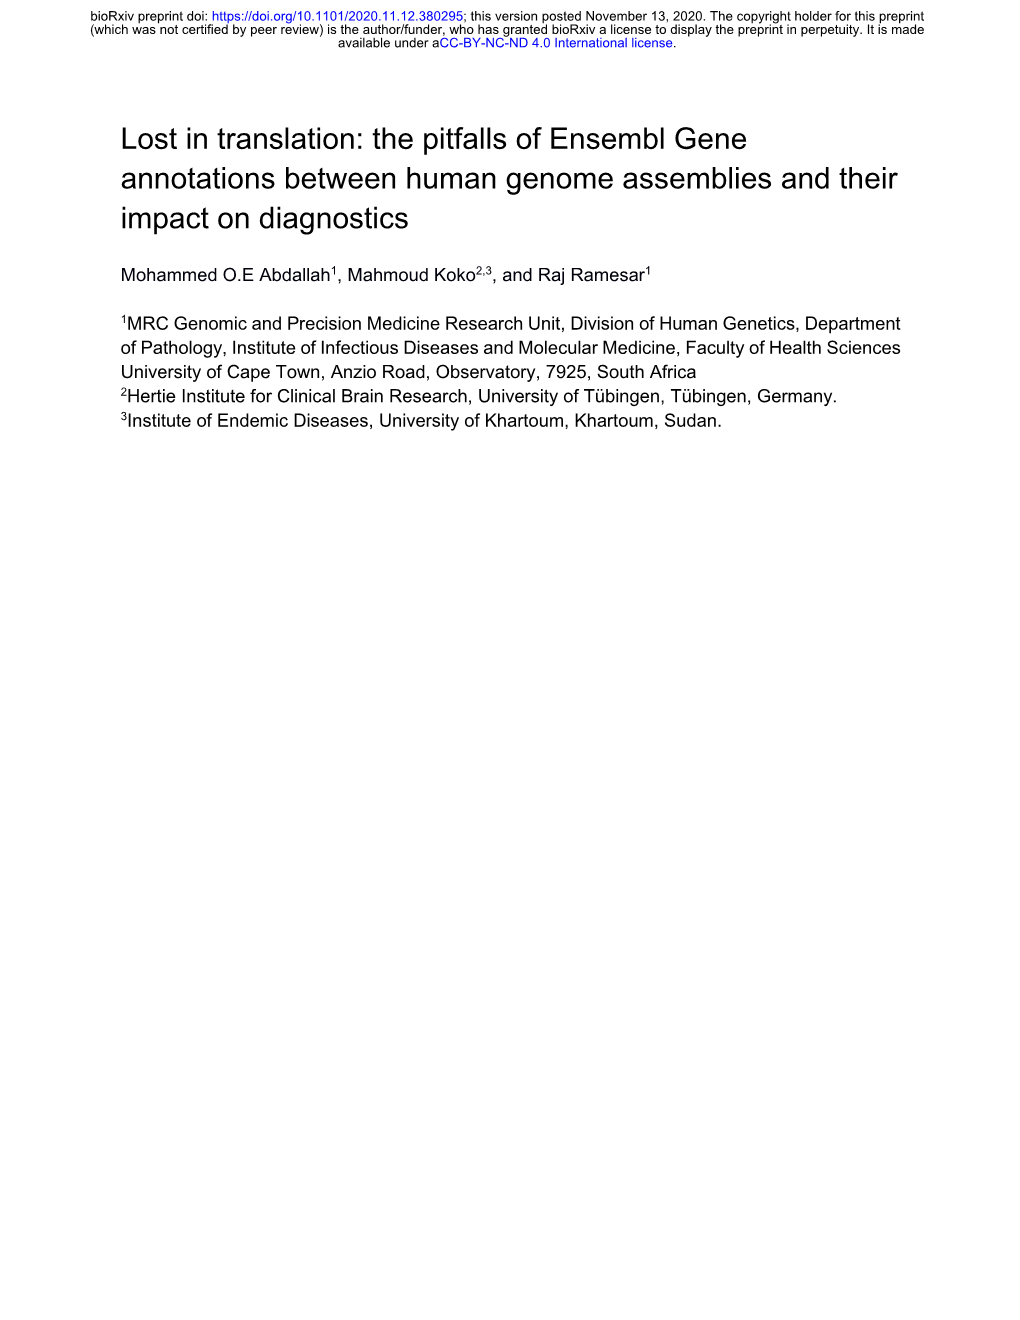 The Pitfalls of Ensembl Gene Annotations Between Human Genome Assemblies and Their Impact on Diagnostics